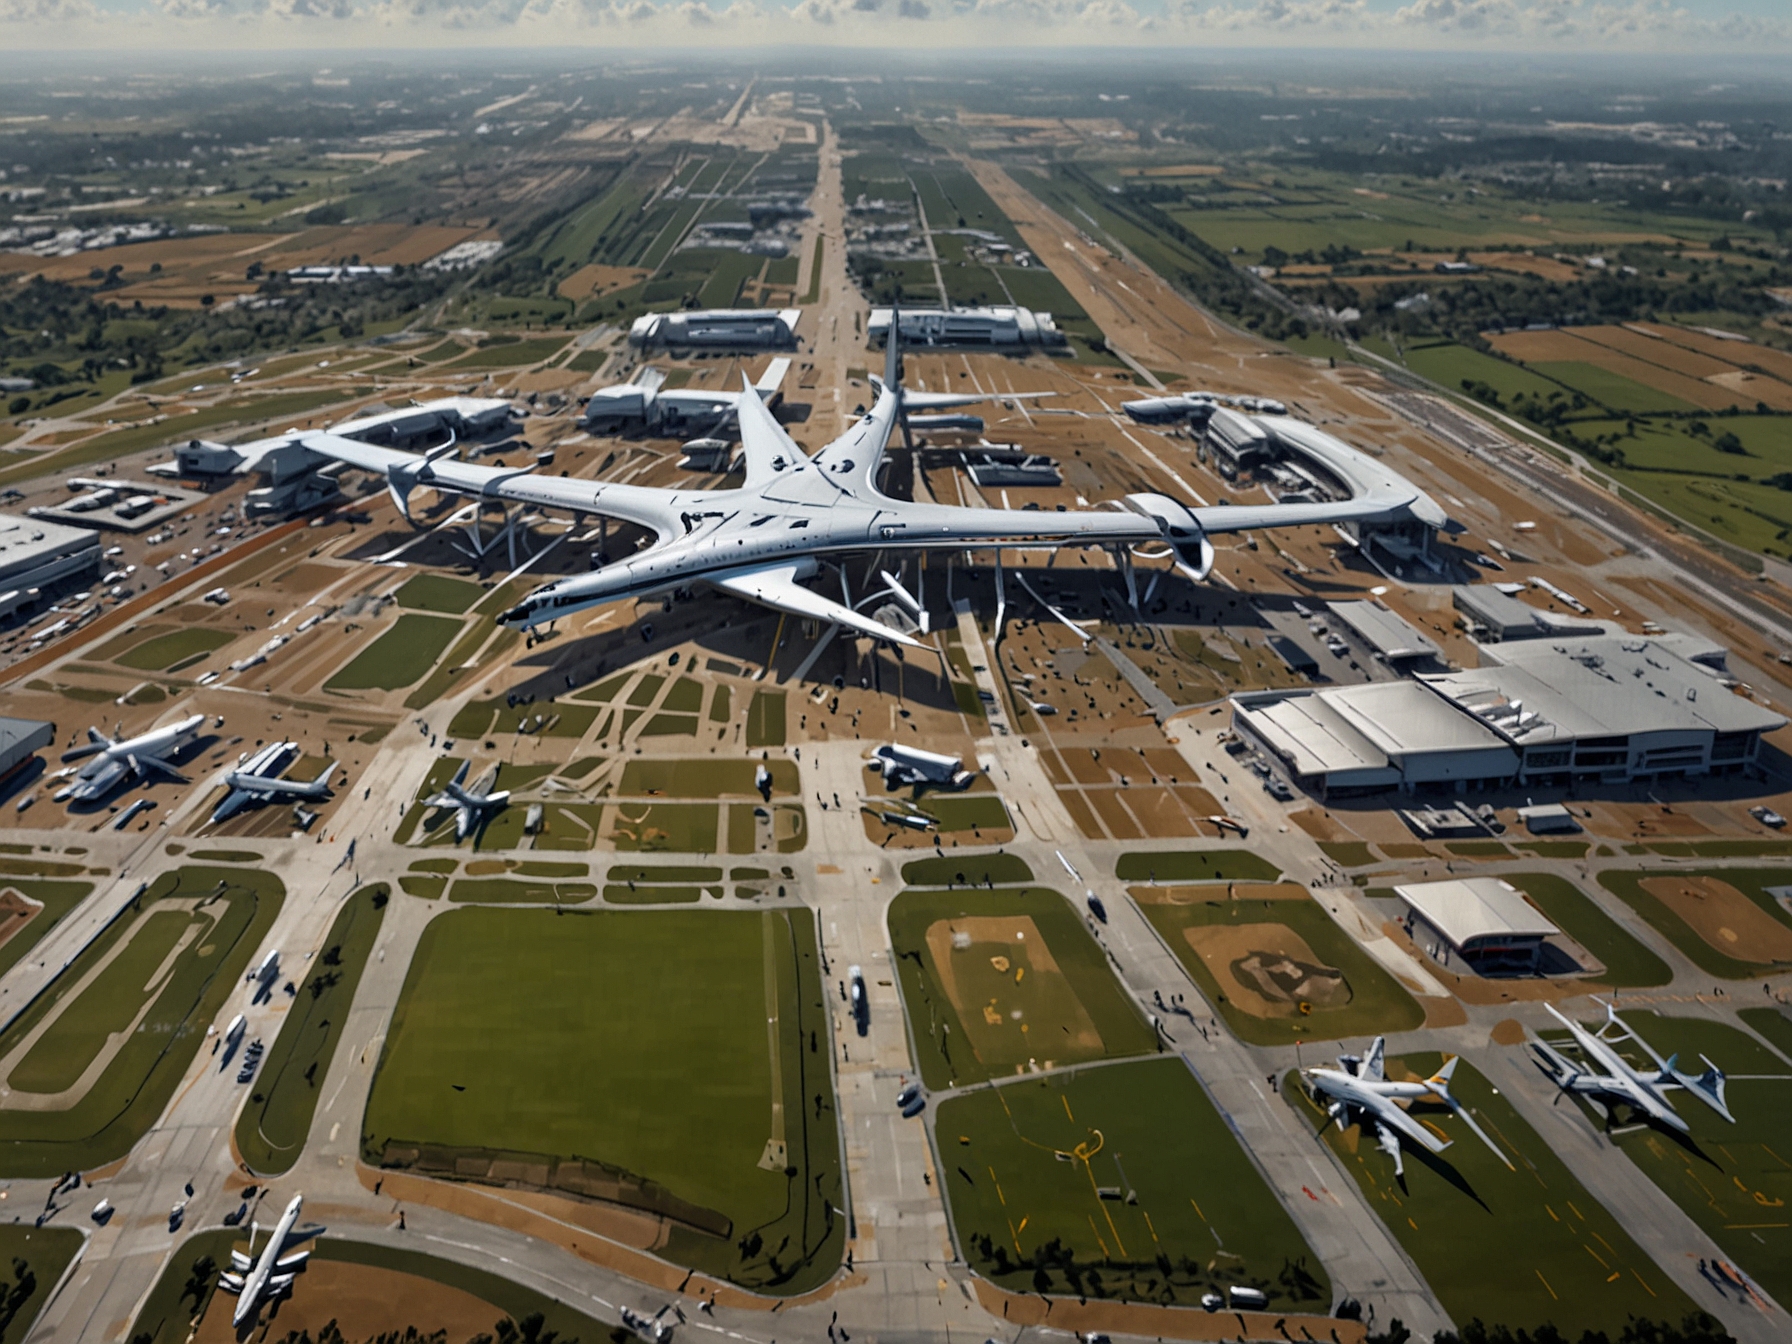 A birds-eye view of London Southend Airport with expanded runways, additional parking space, and improved transport links, highlighting the airport’s readiness to accommodate more flights and passengers.